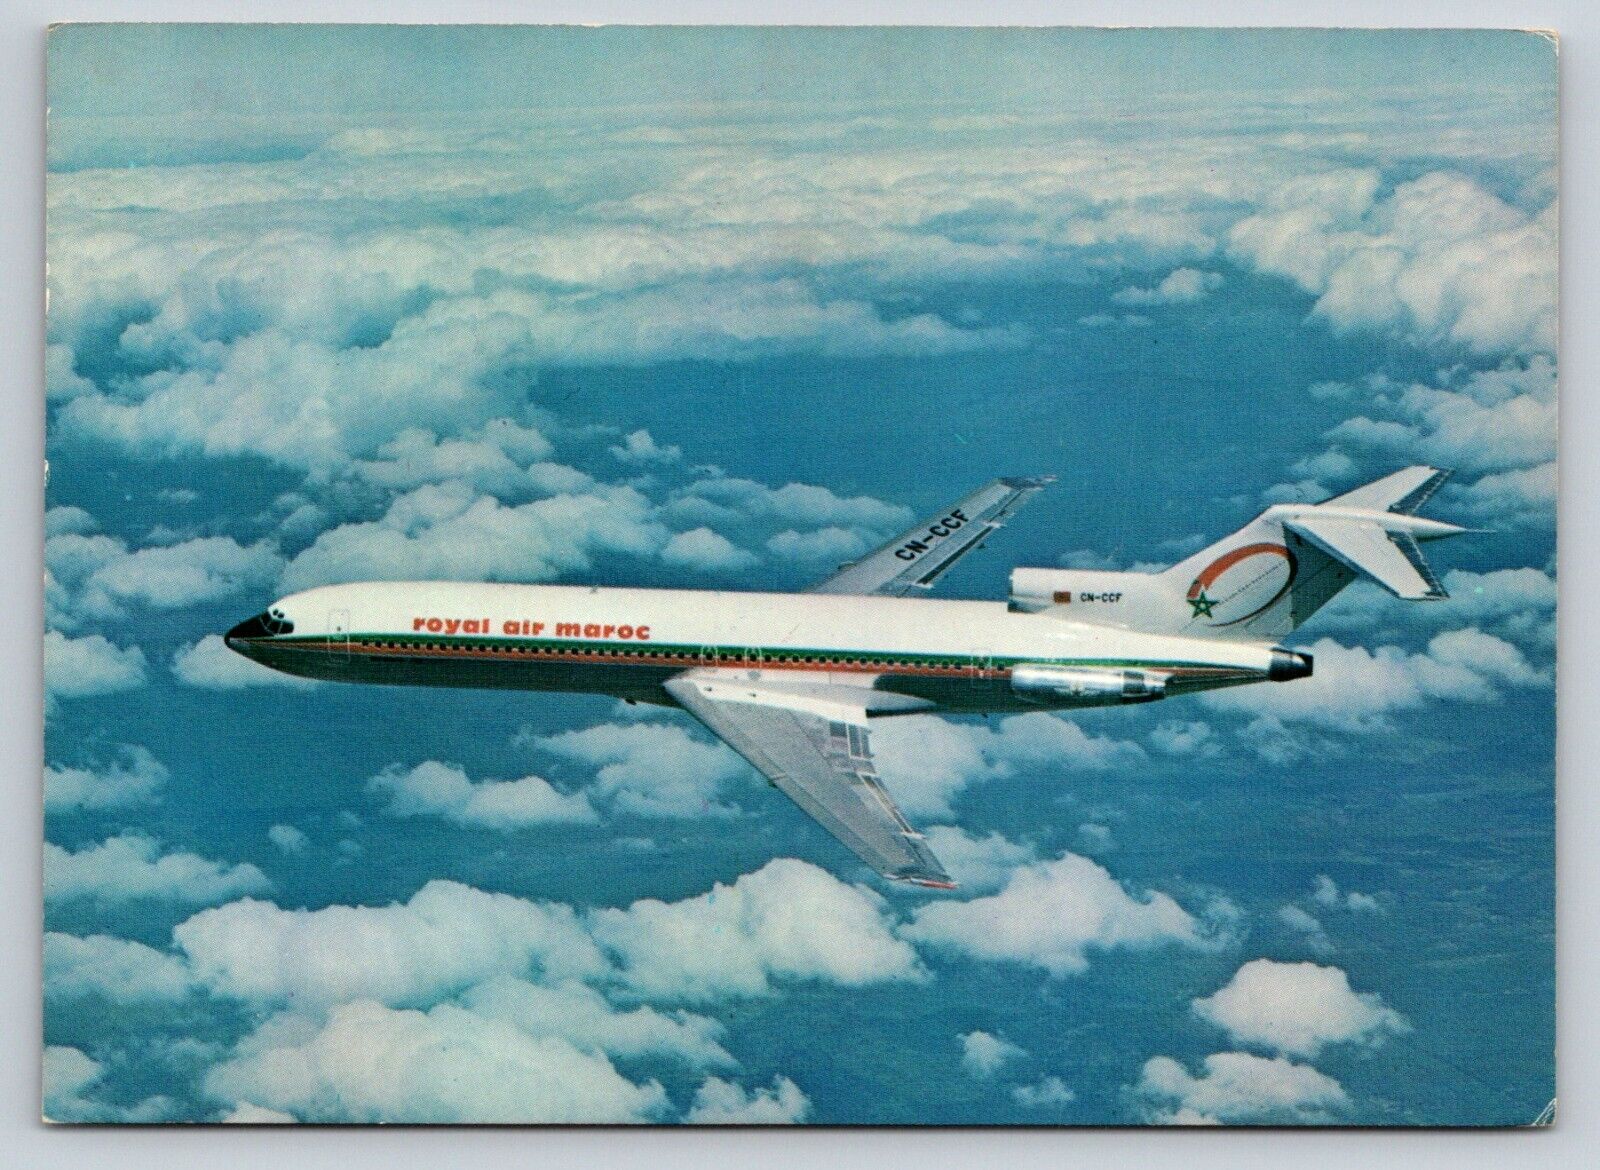 RAM Royal Air Maroc Airlines Boeing 727-200 4x6 Postcard Morocco airline issued